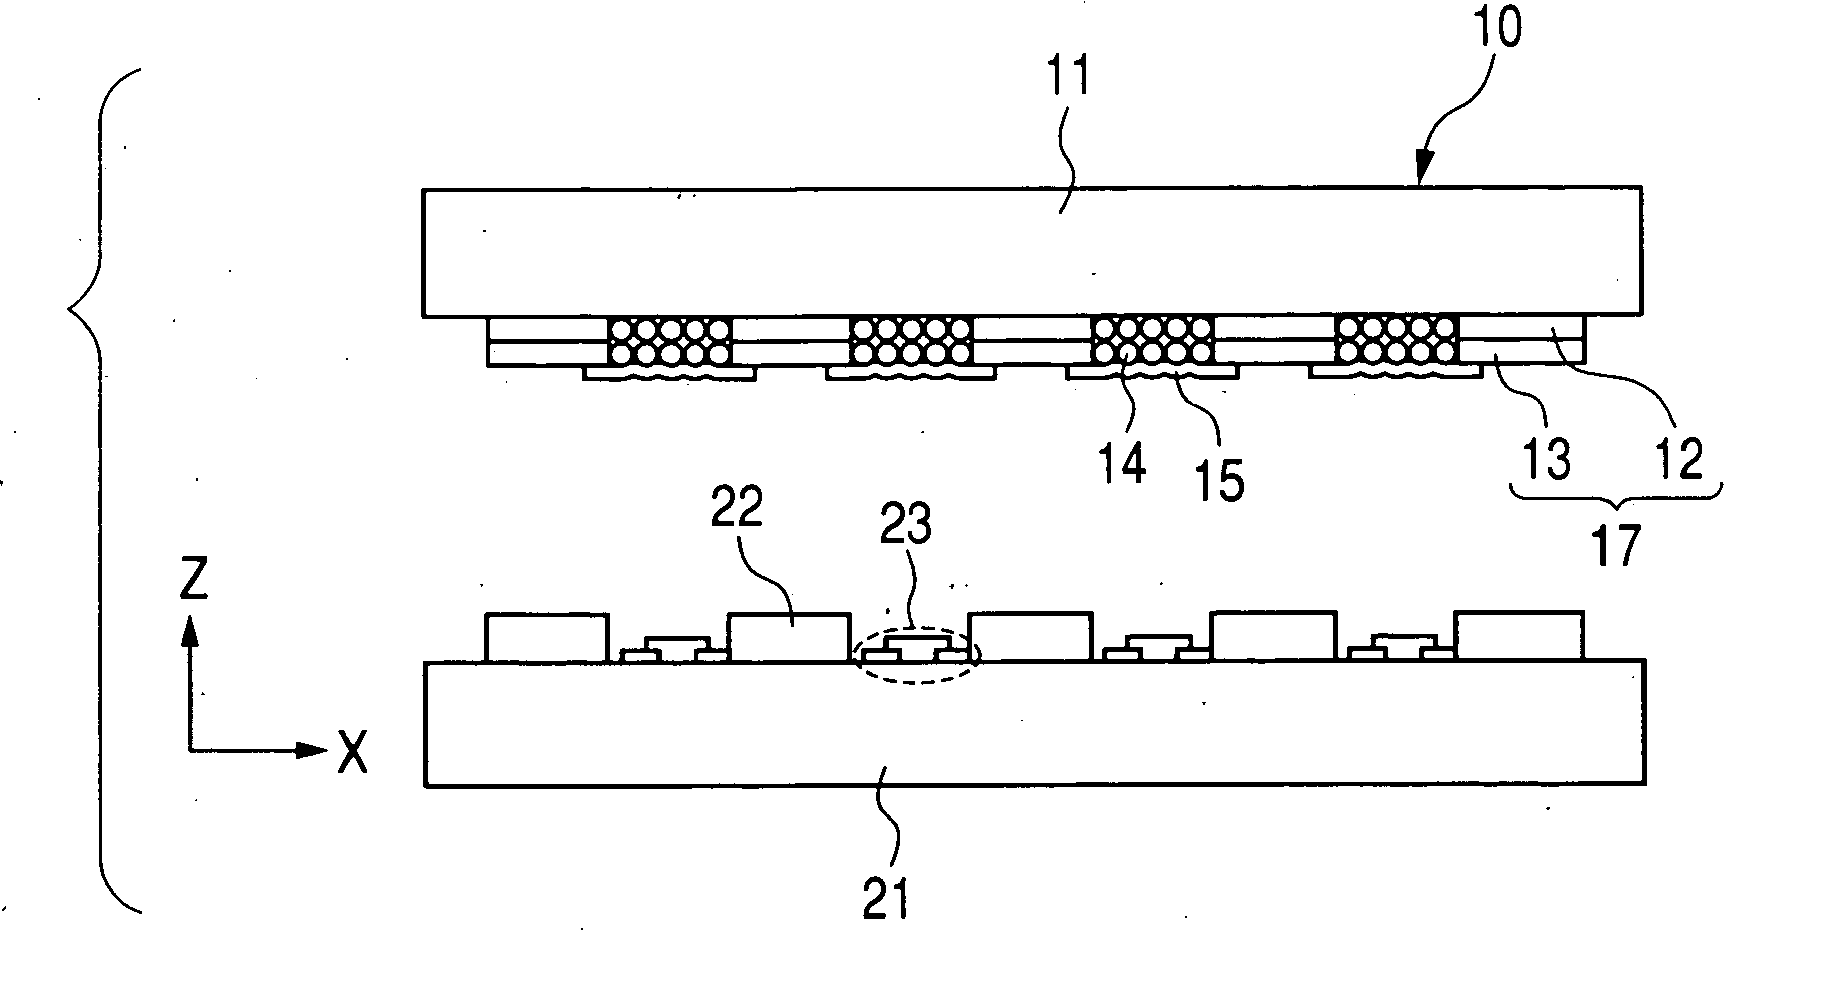 Substrate having a light emitter and image display device